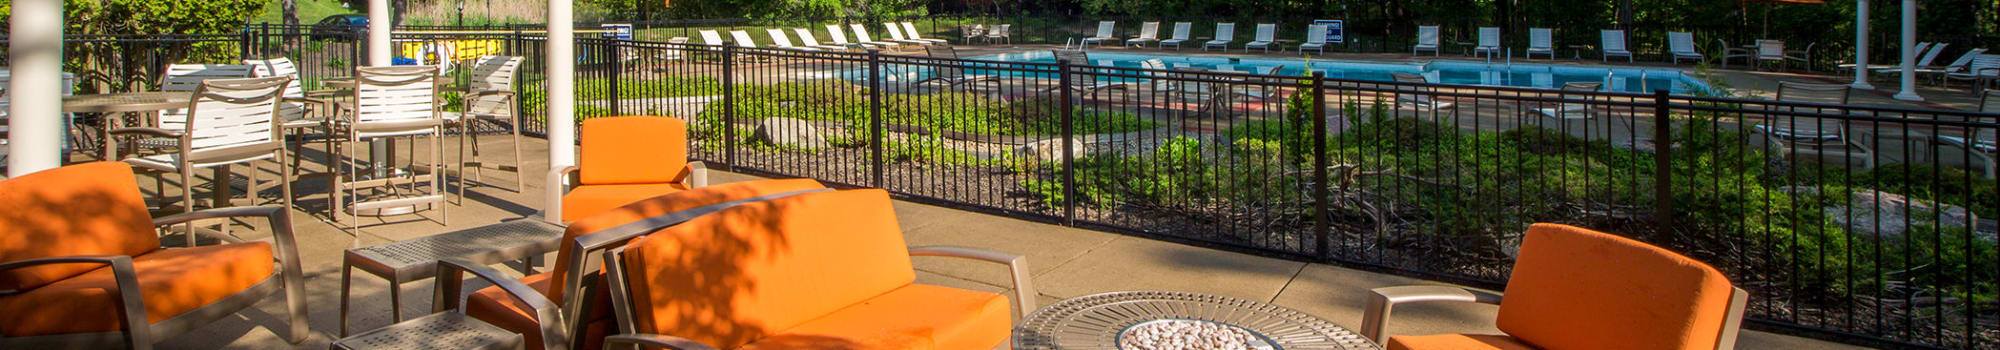 Pet Friendly Apartments at Aldingbrooke in West Bloomfield, Michigan